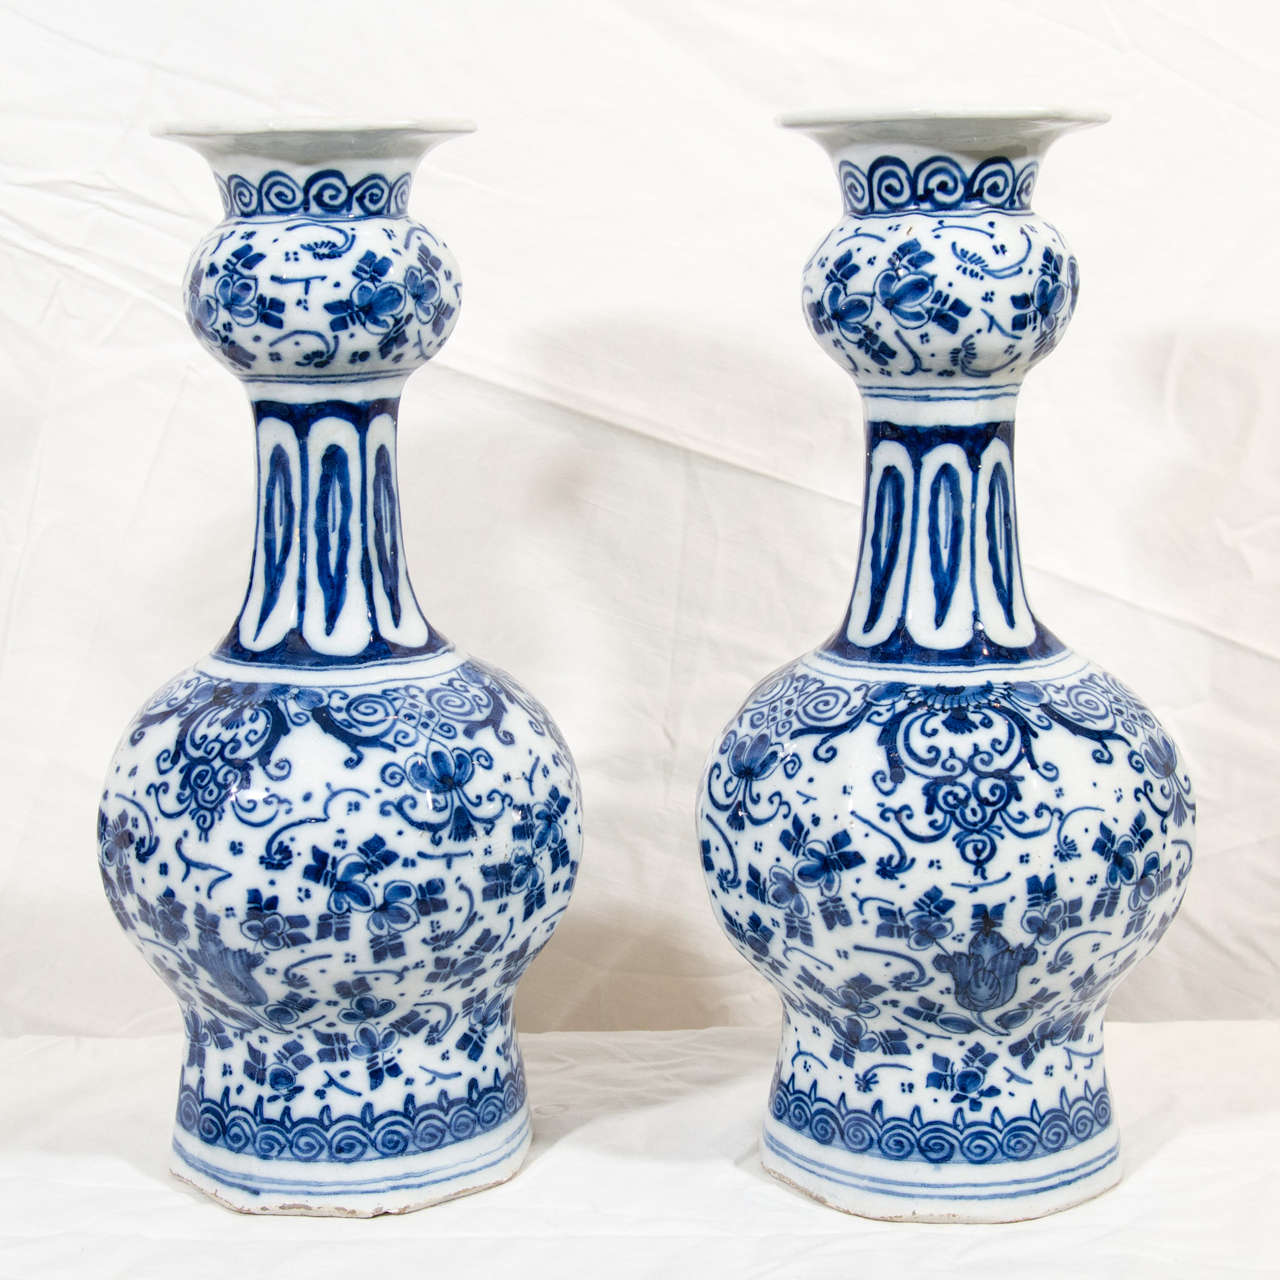 Provenance: From the collection of Katherine Mellon
A pair of Dutch Delft Blue and White vases with an all over design of tulips and other flowers. At the top and bottom of the vases are bands of scrolling. On the shoulder of each vase are